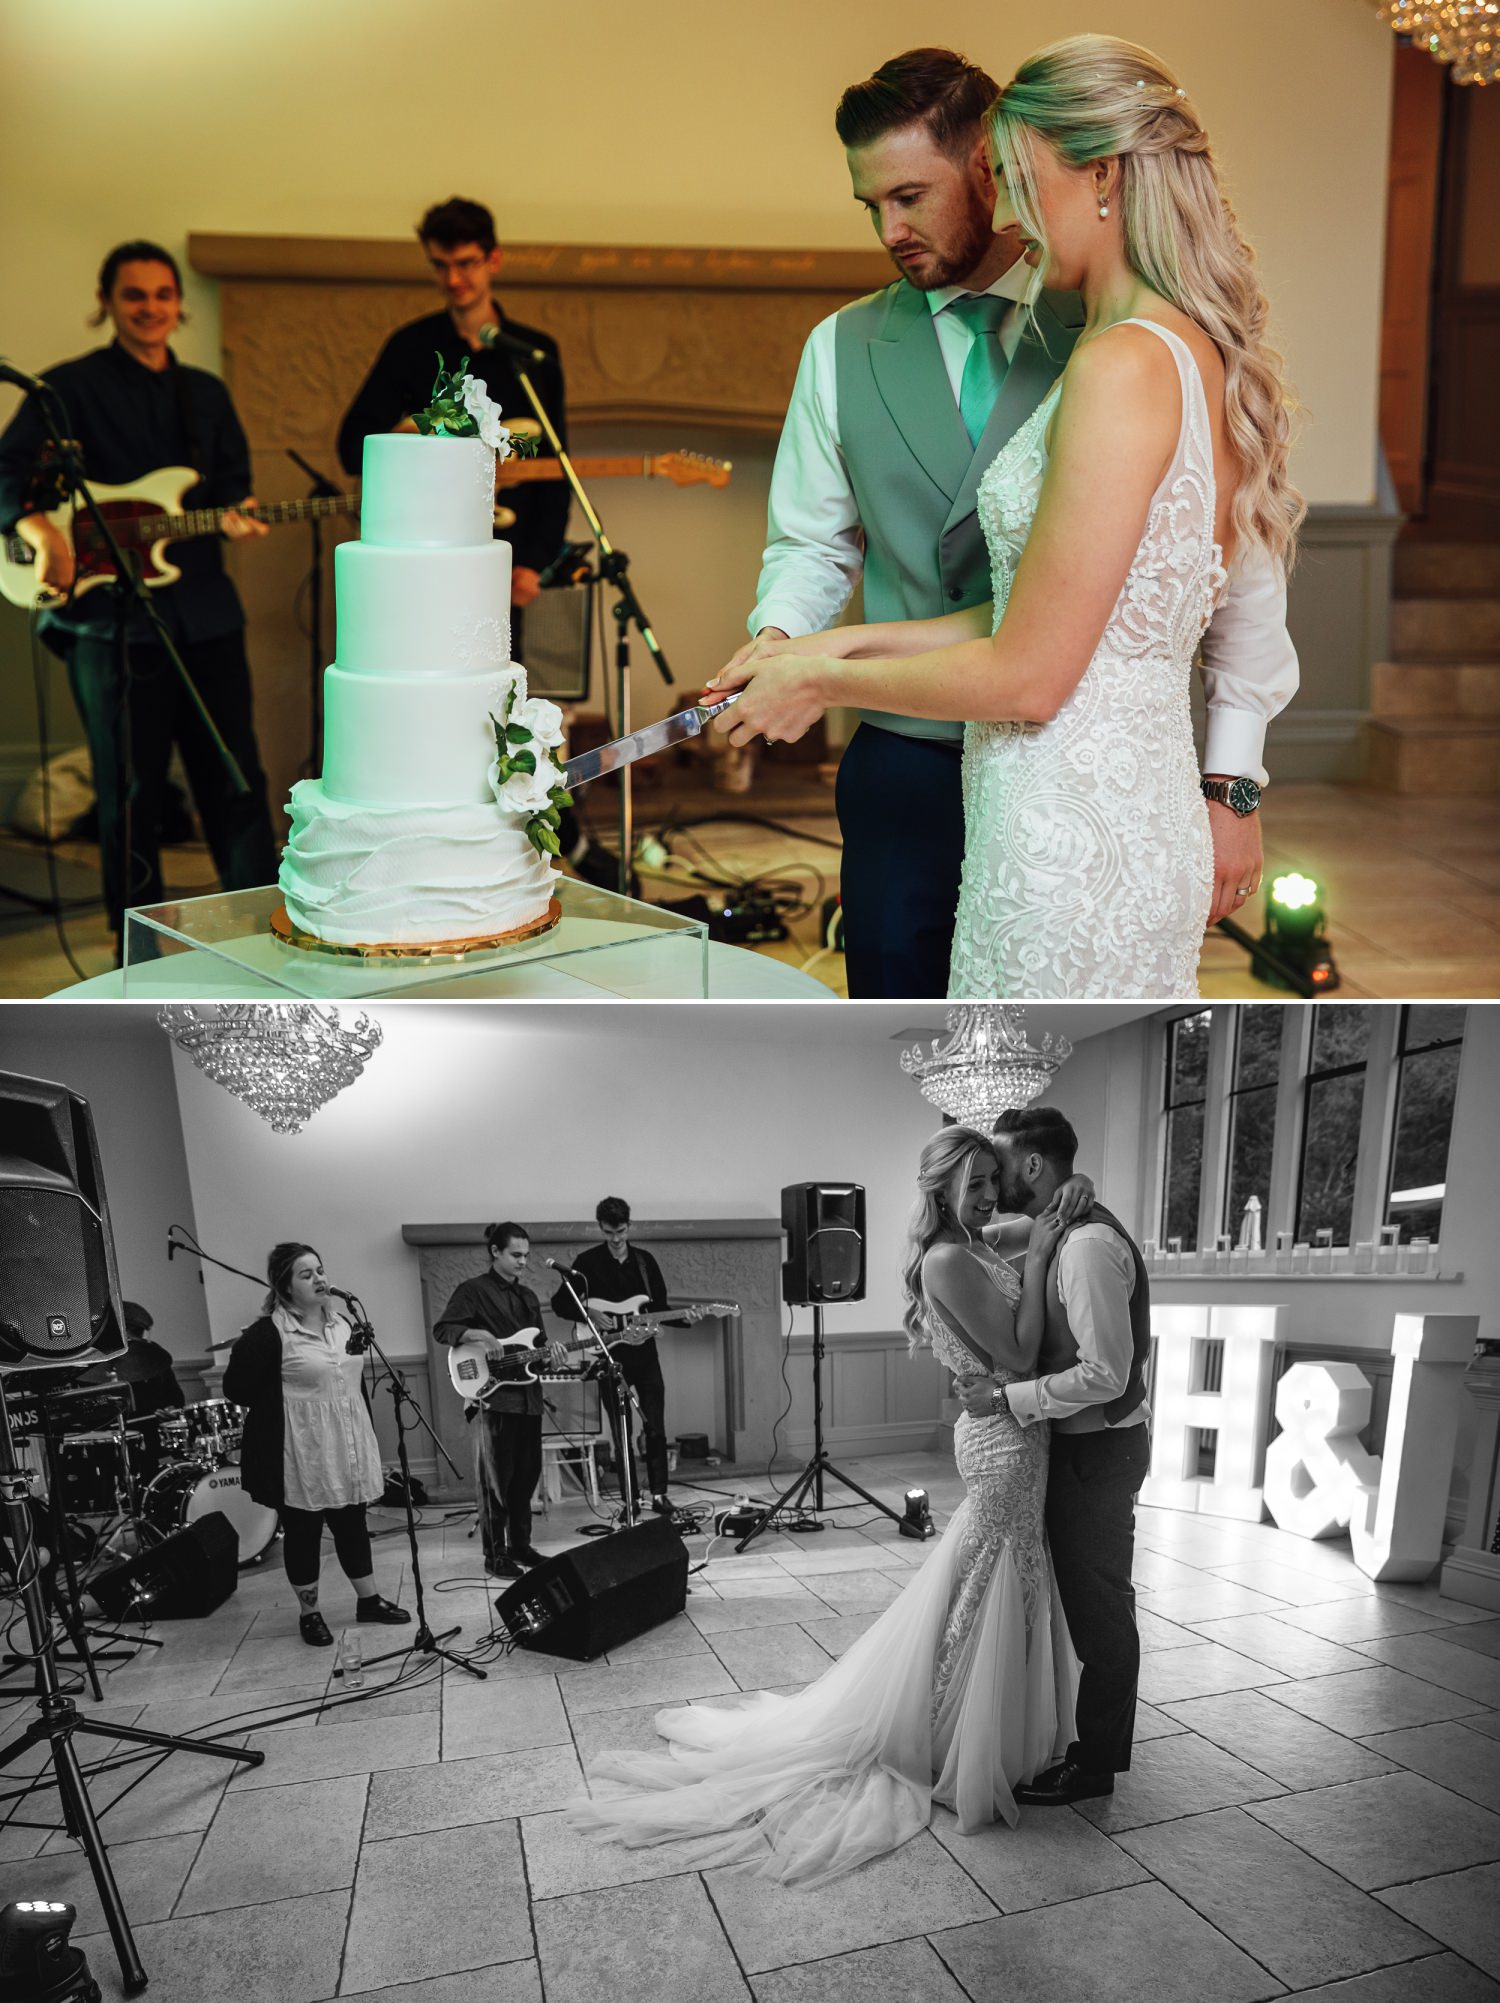 Cutting of the cake and first dance